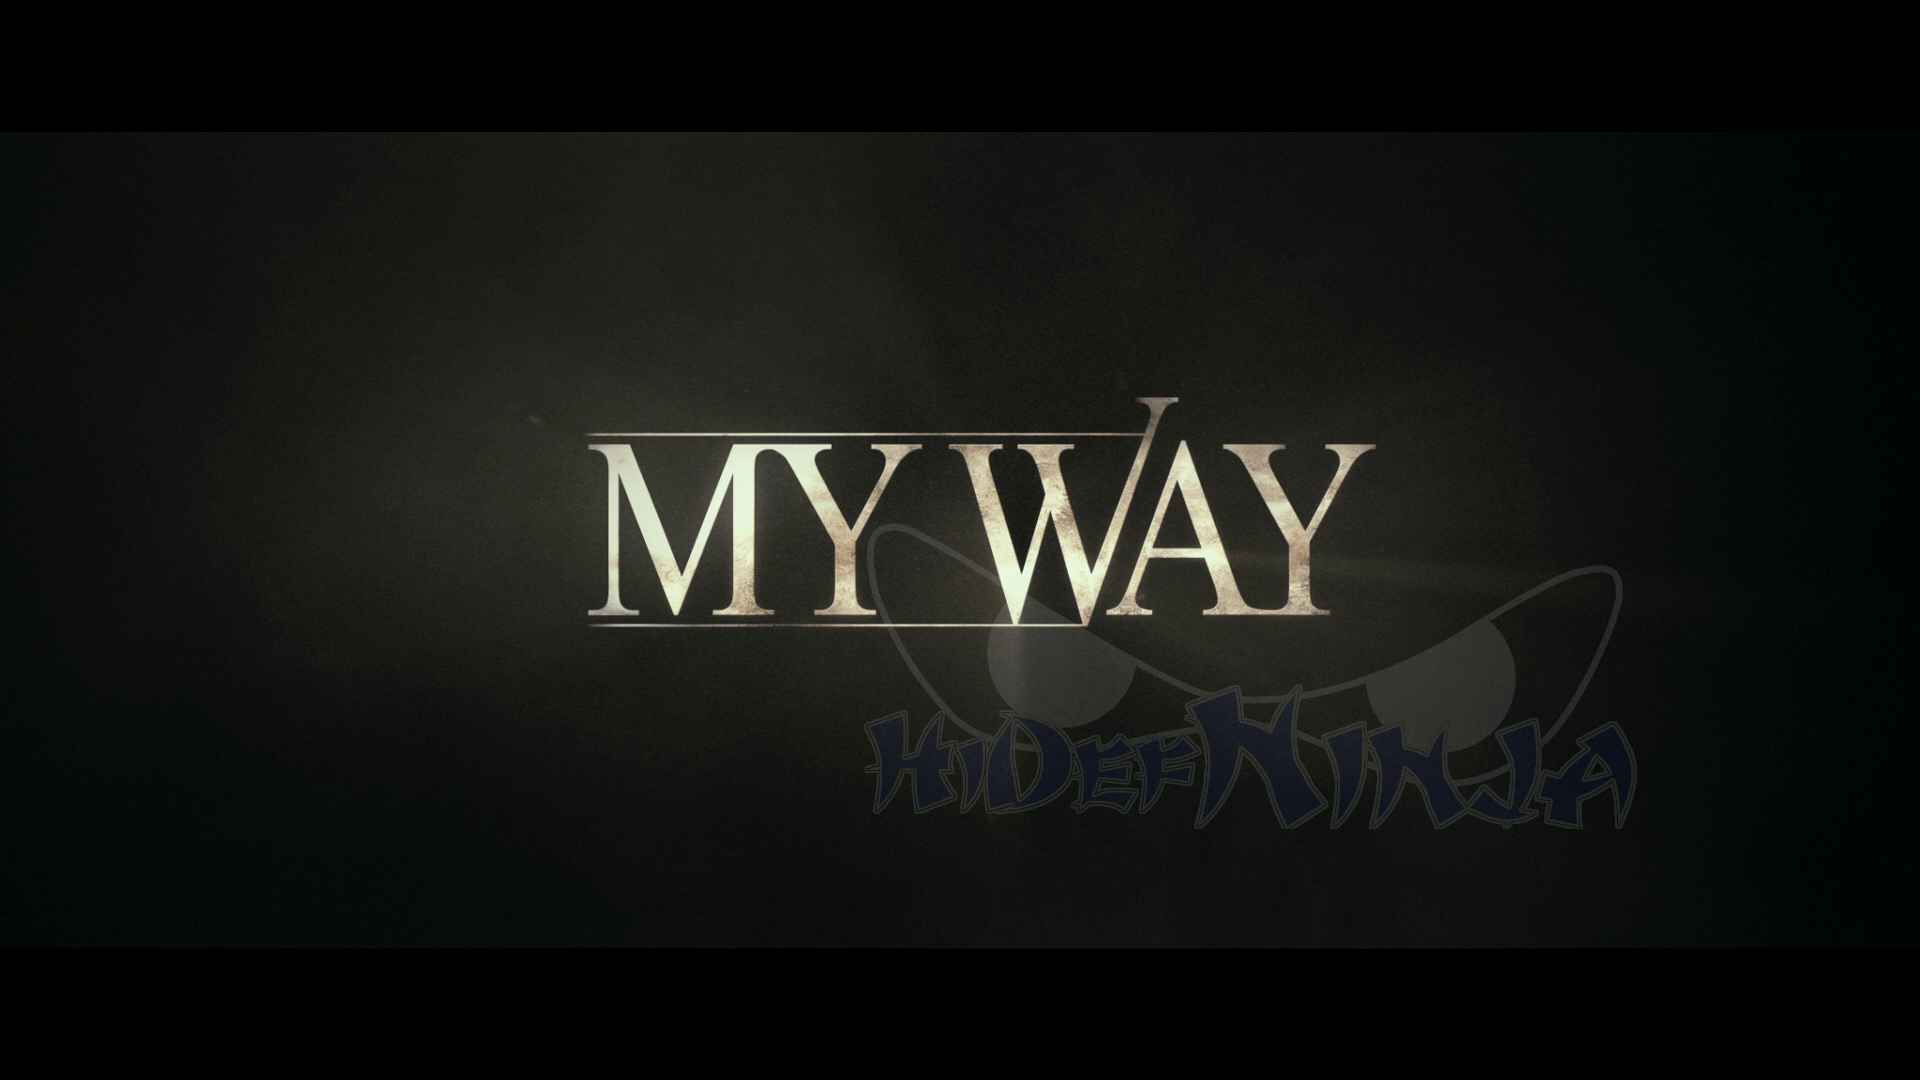 fight for my way download torrent